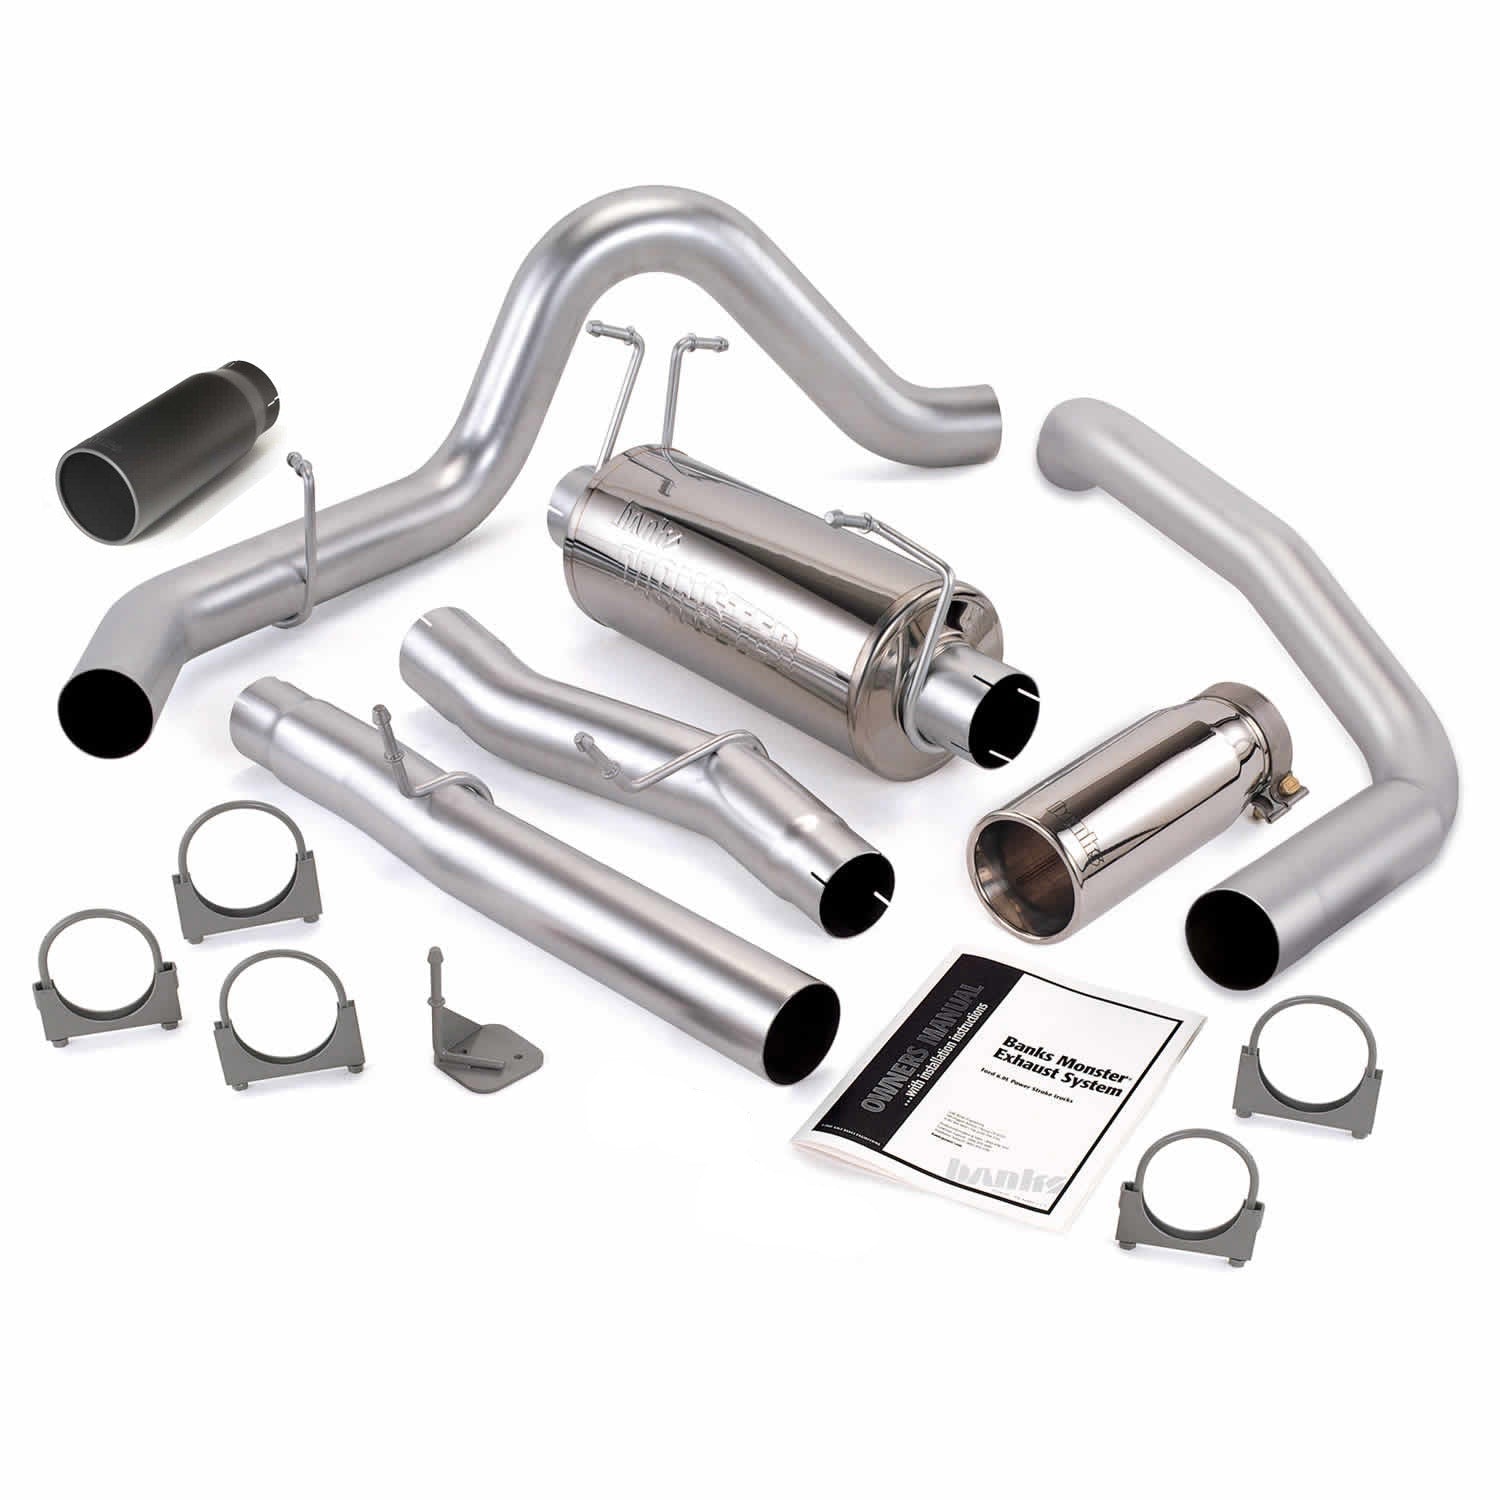 Monster Exhaust 48787-b and chrome